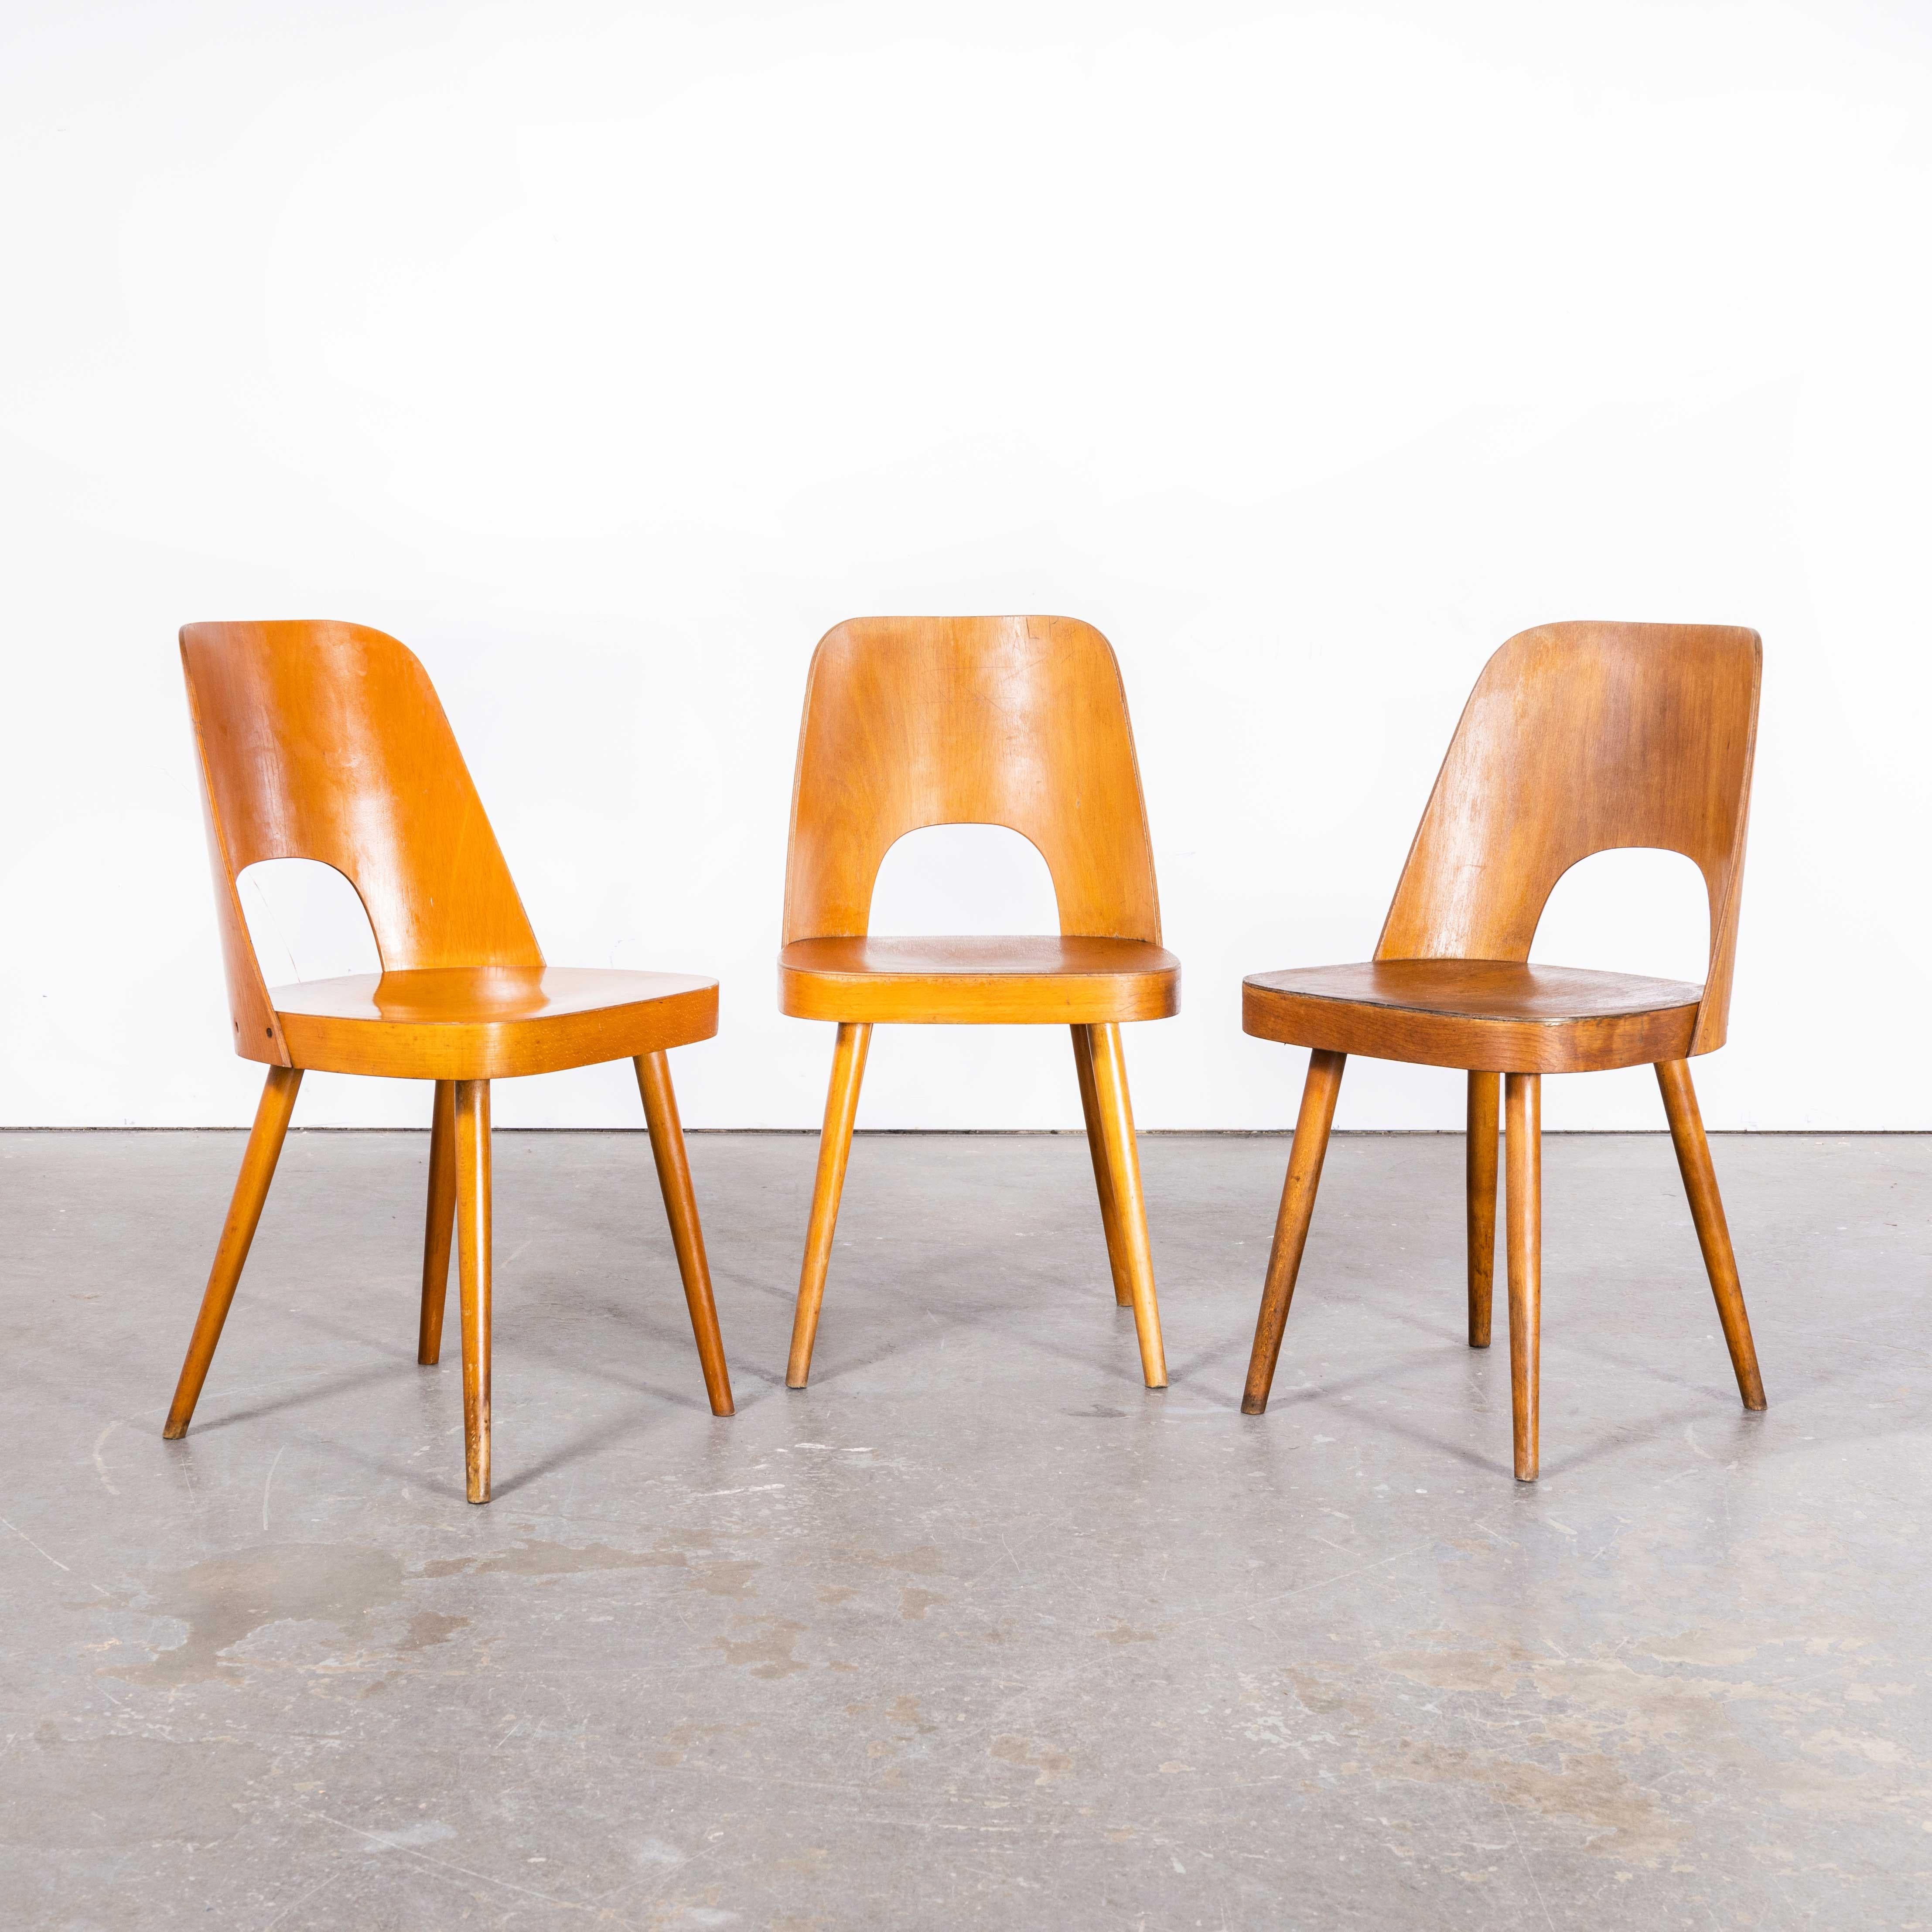 1950s Honey Oak Side Chairs – Oswald Haerdtl Model 515 – Set Of Three
1950s Honey Oak Side Chairs – Oswald Haerdtl Model 515 – Set Of Three. These chairs were produced by the famous Czech firm Ton, still trading today and producing beautiful